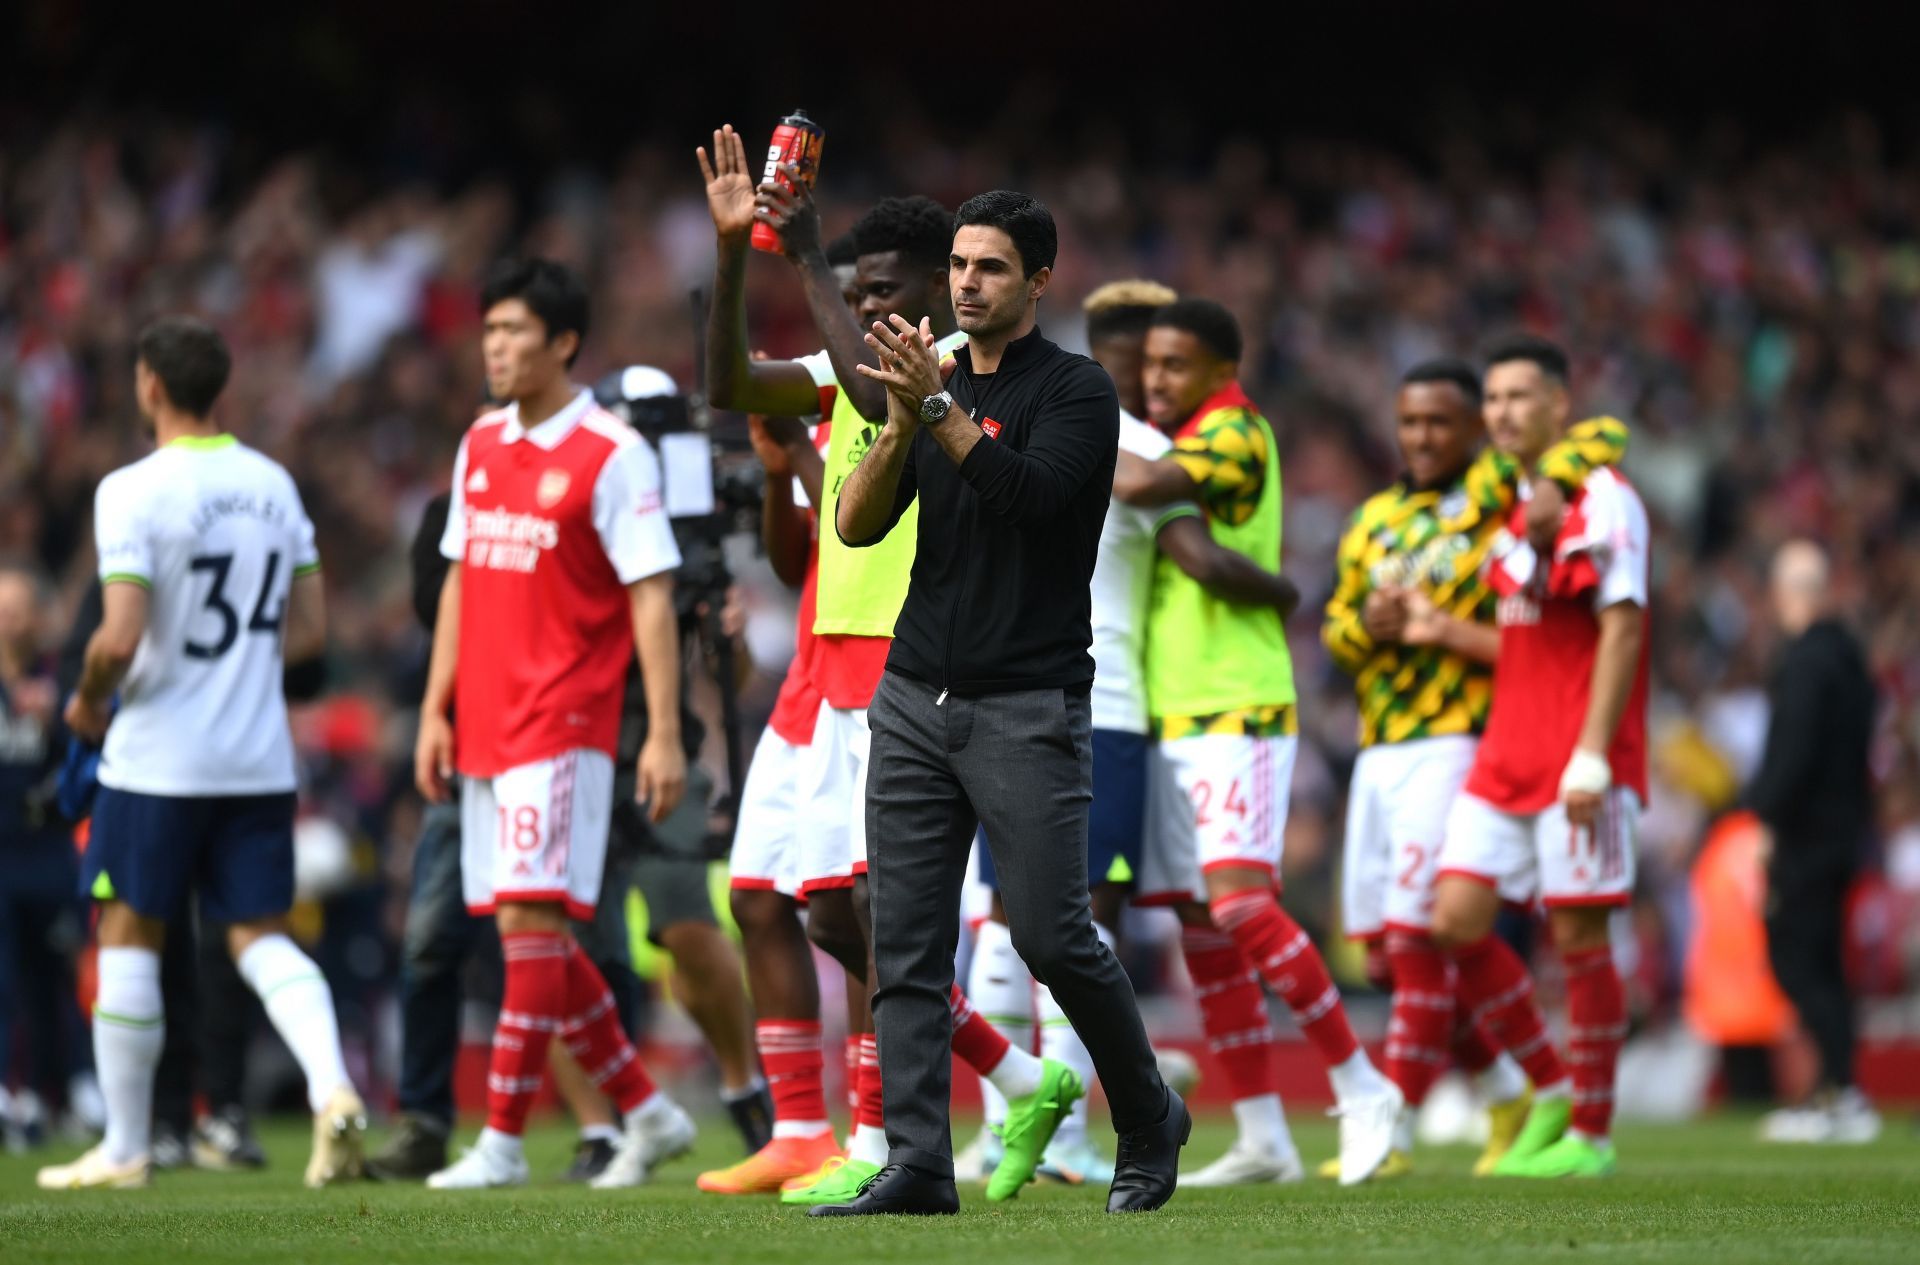 Mikel Arteta and his men are on a mission this season.